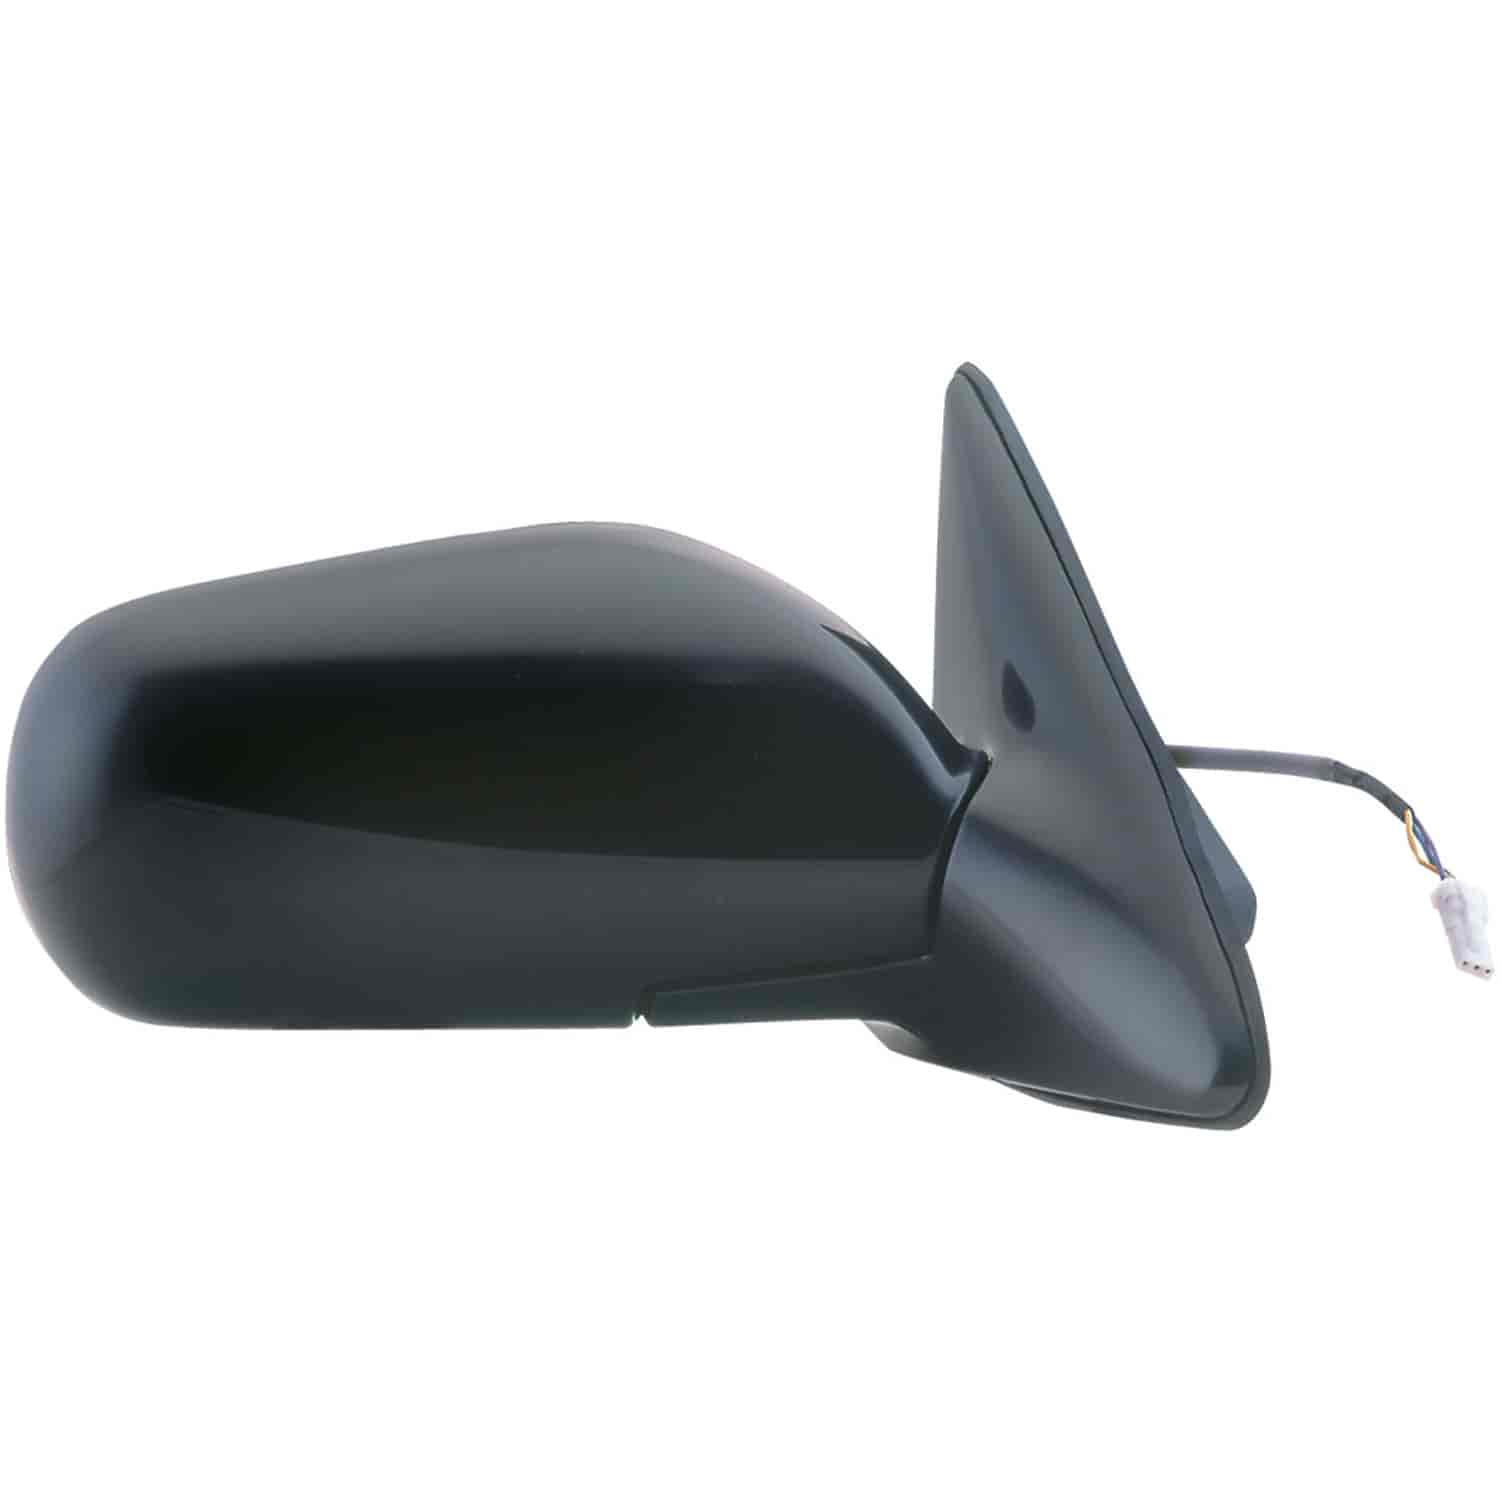 OEM Style Replacement mirror for 91-96 Infiniti G20 passenger side mirror tested to fit and function